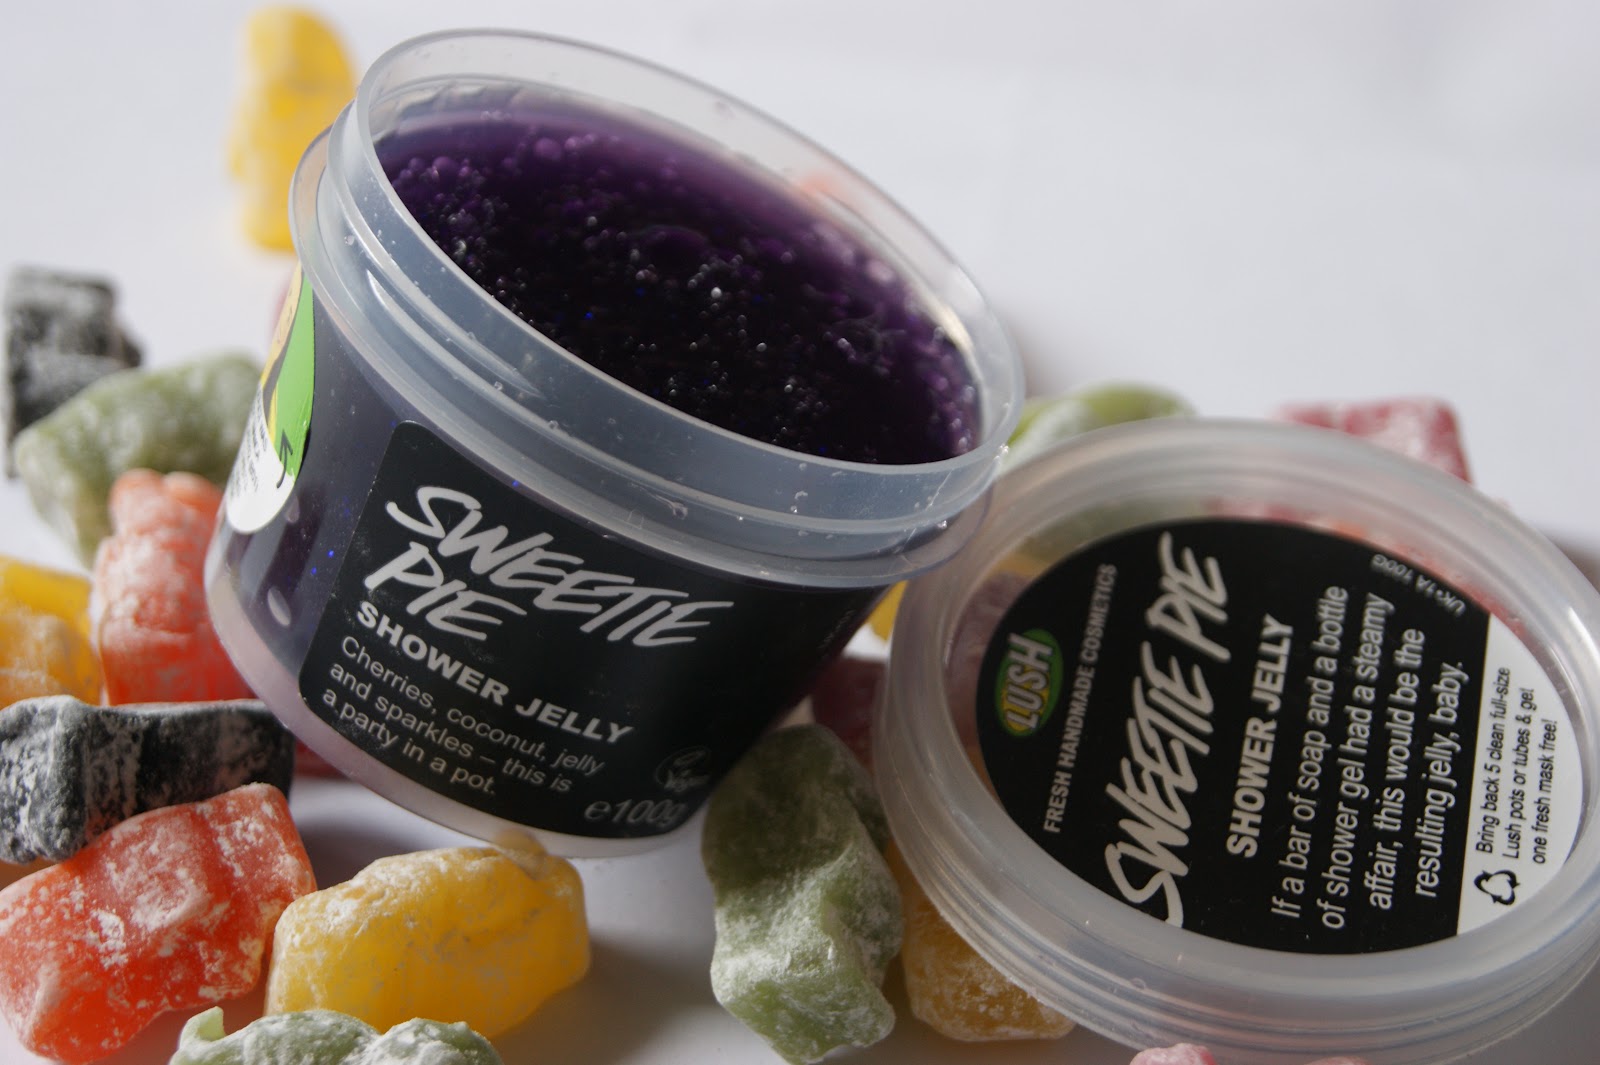 Lush Sweetie Pie Shower Jelly - Review